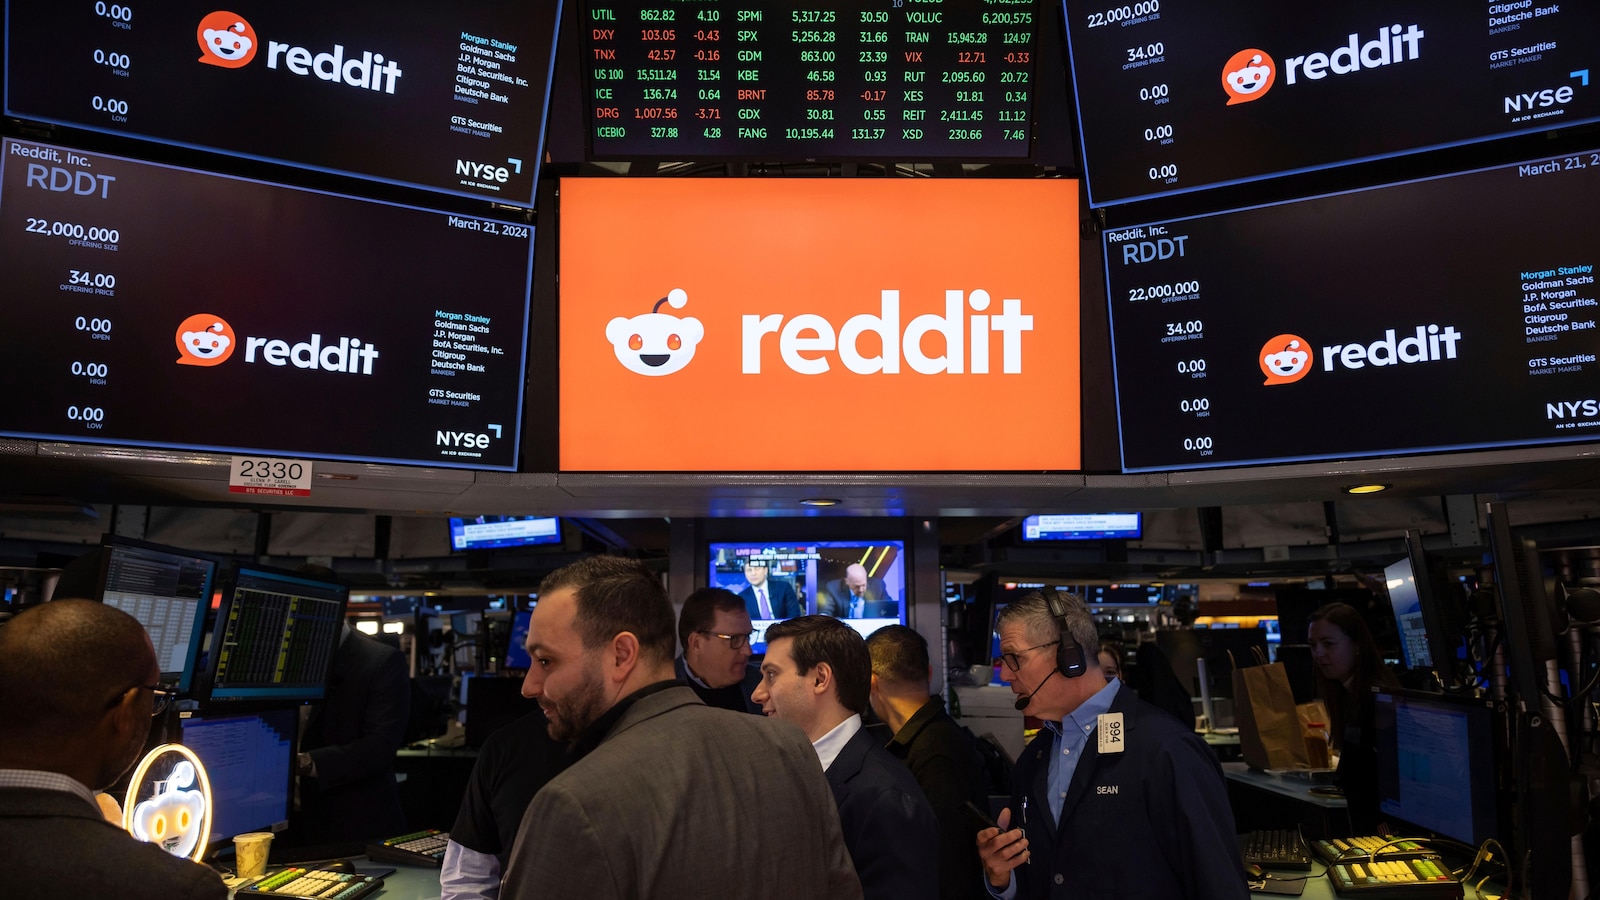 OpenAI and Reddit are teaming up in a deal that will bring Reddit's content to ChatGPT